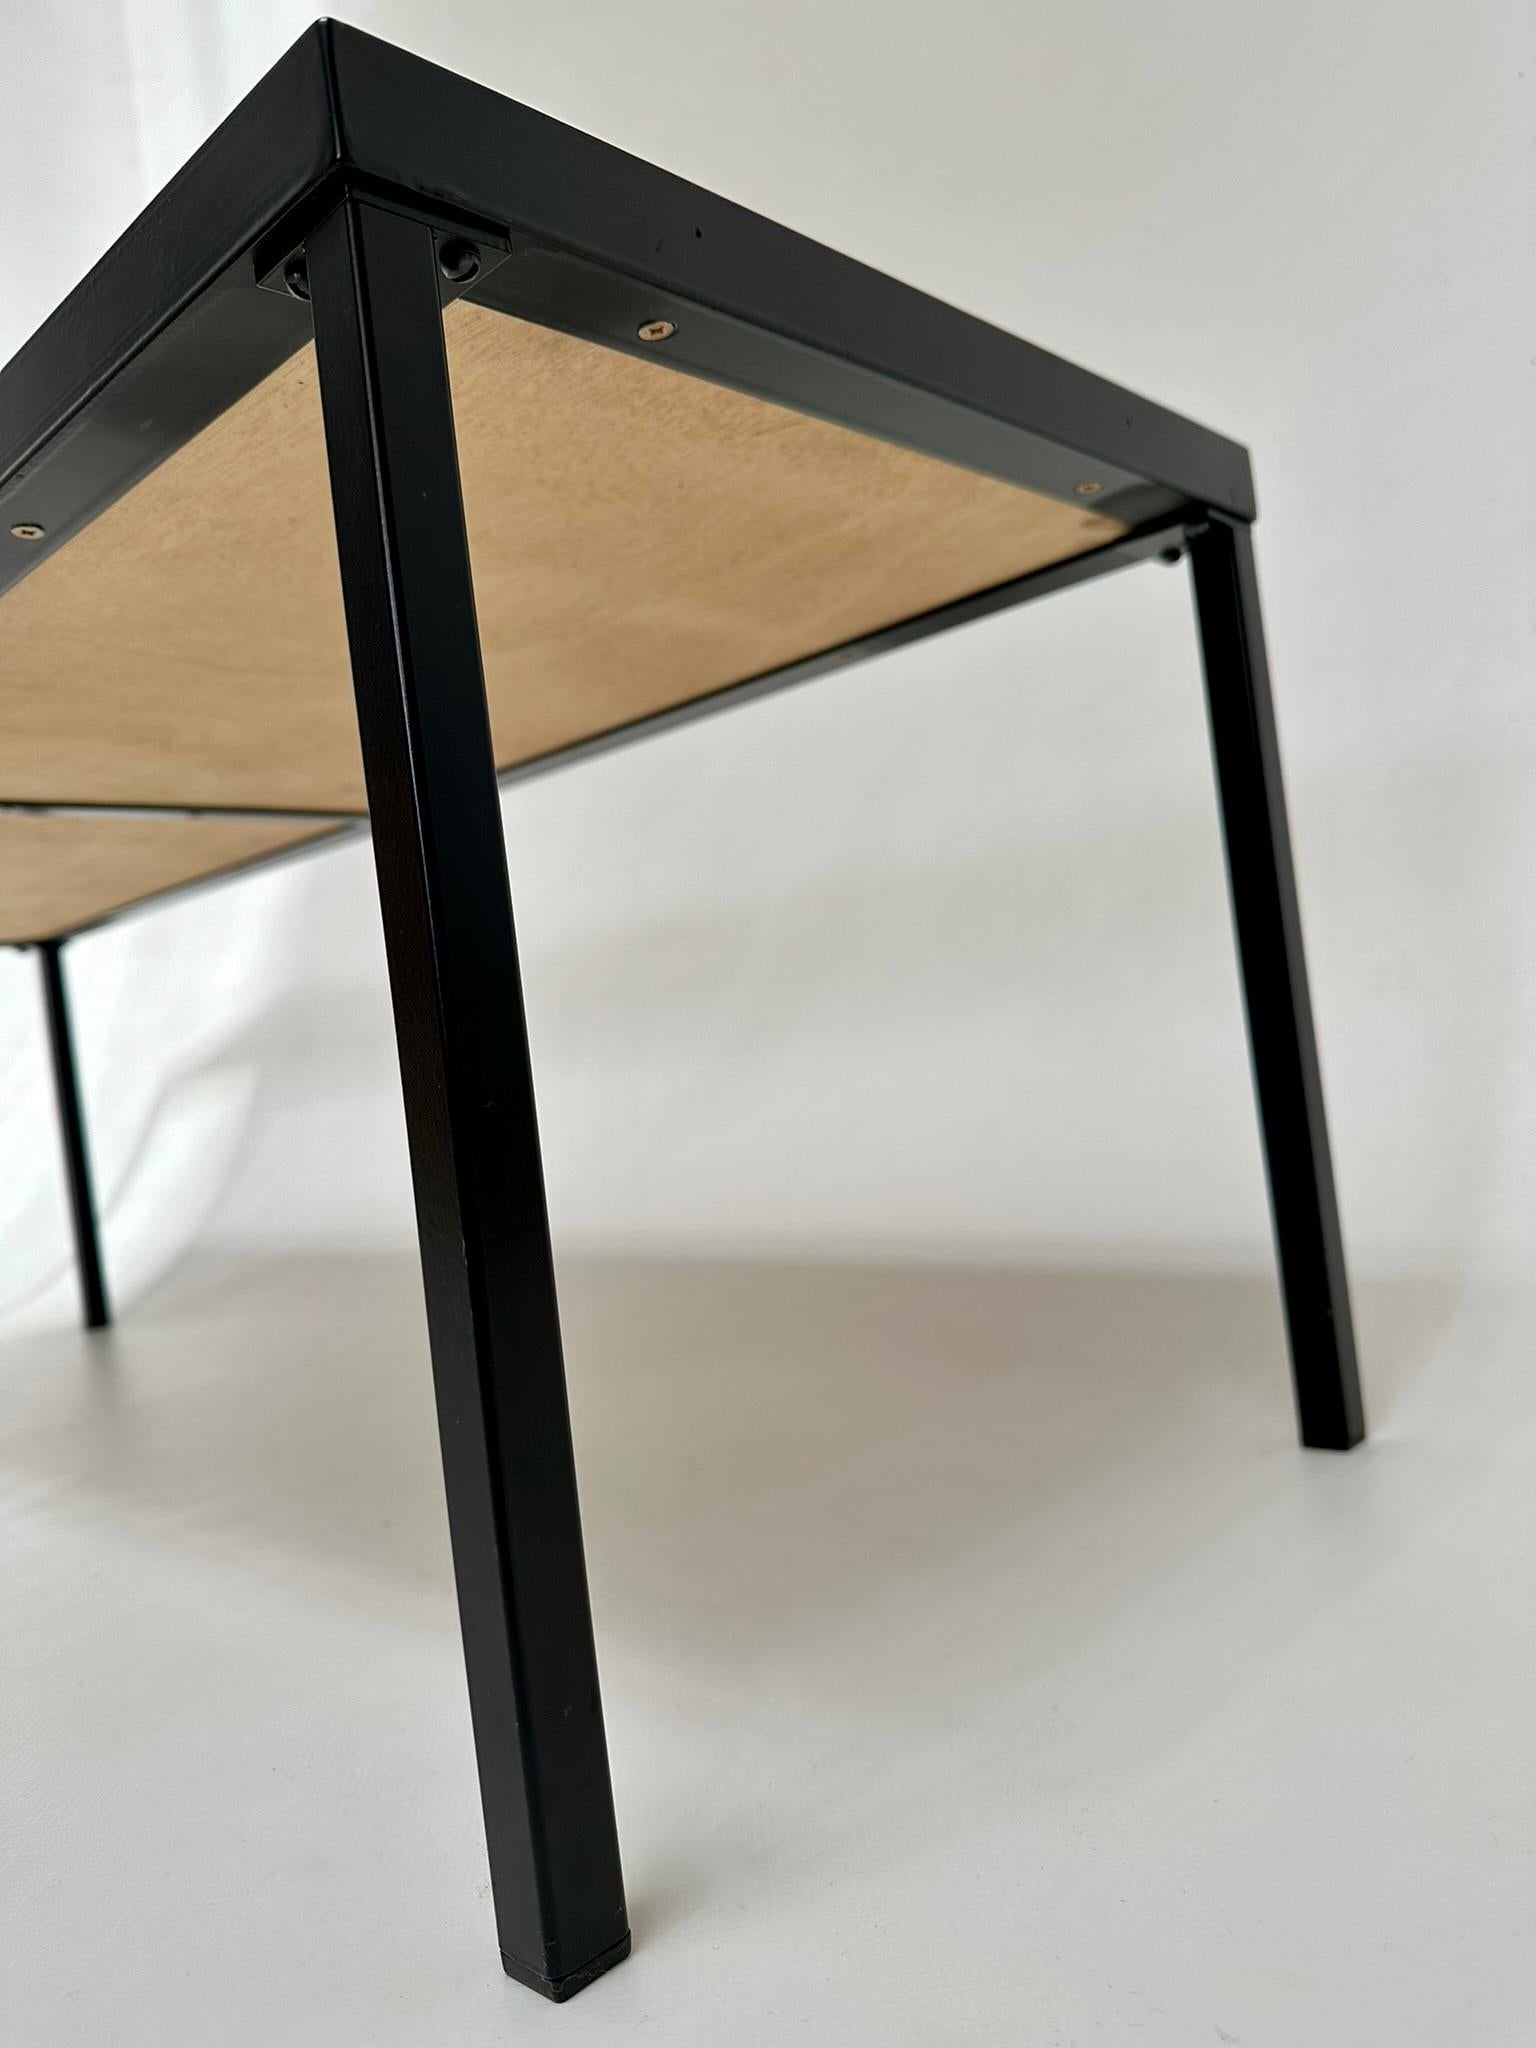 Iconic Navettes Low Table, Roger Capron, Vallauris c. 1960 For Sale 1